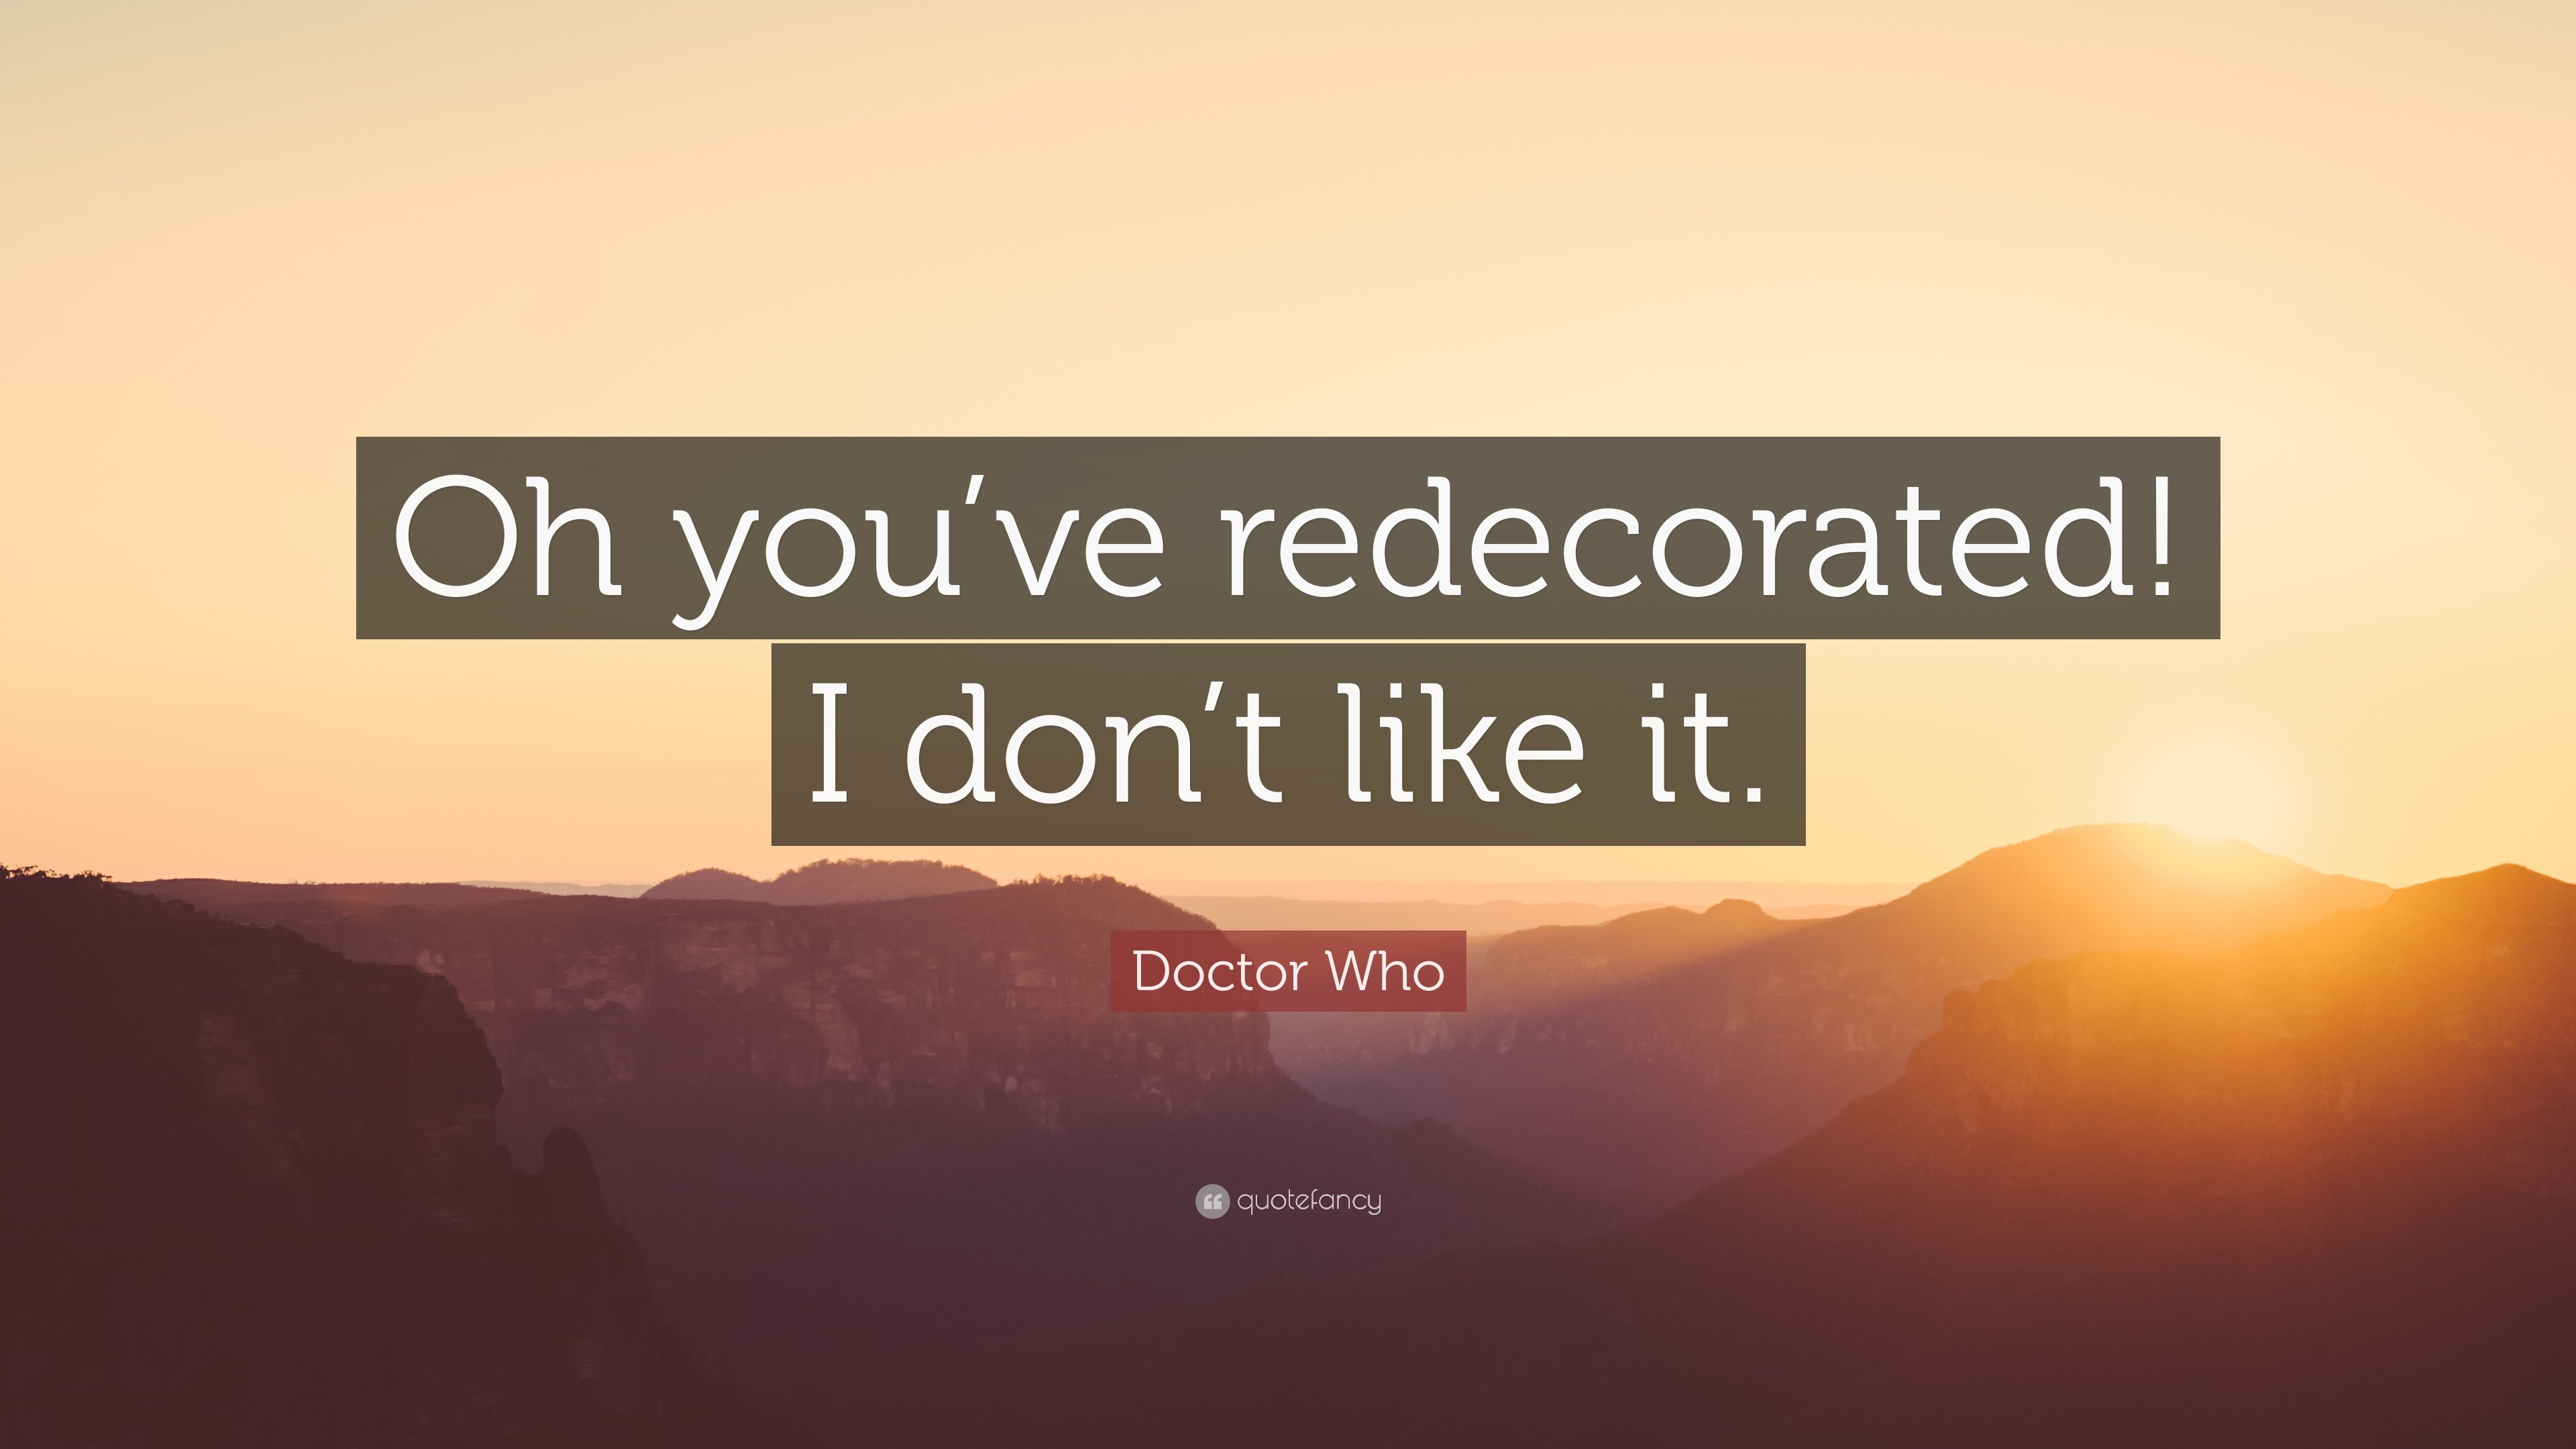 3840x2160 Doctor Who Quote: “Oh you've redecorated! I don't like